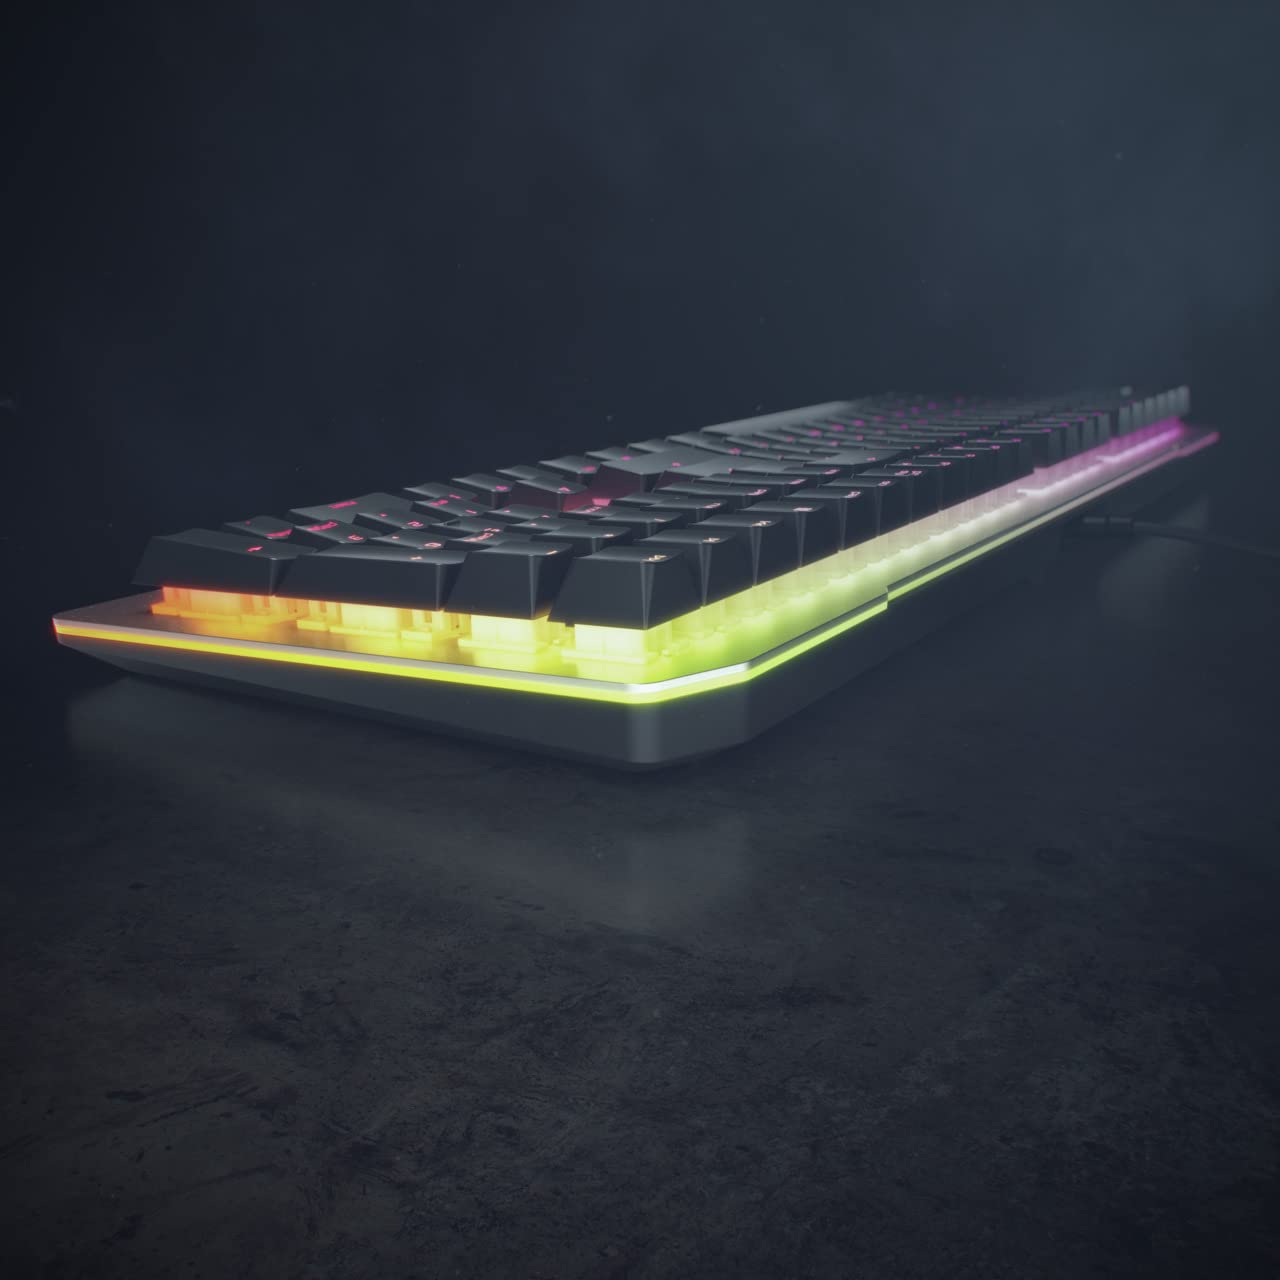 Cherry MV 3.0 Viola Wired Mechanical Gaming Keyboard. RGB Backlight with Cross Linear Viola Switches. from The Makers of The MX Switch. (Black)